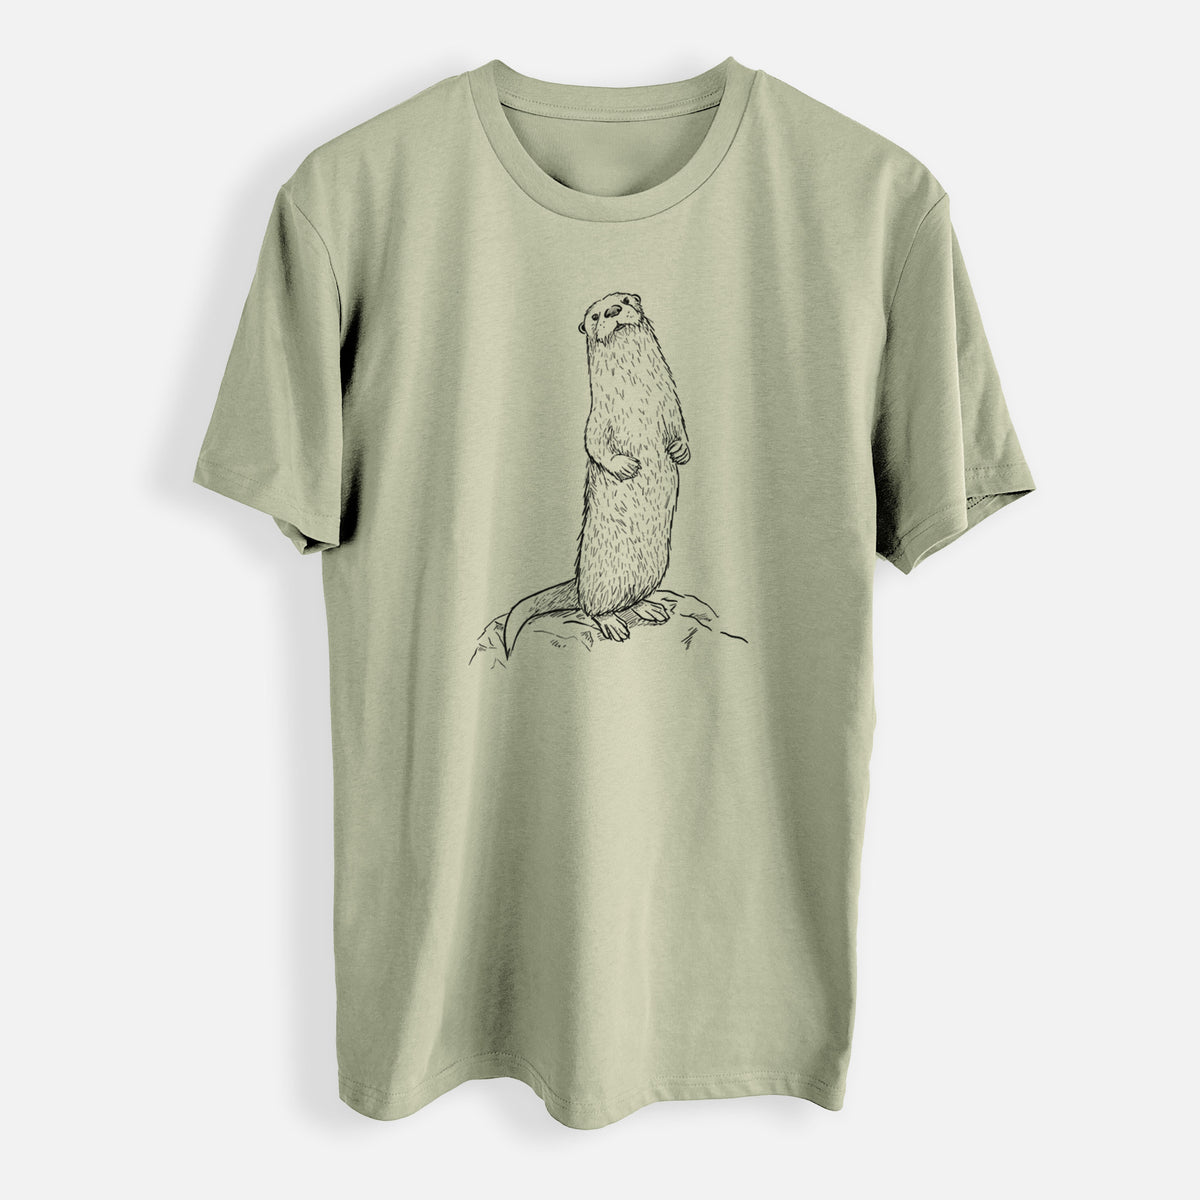 North American River Otter - Lontra canadensis - Mens Everyday Staple Tee